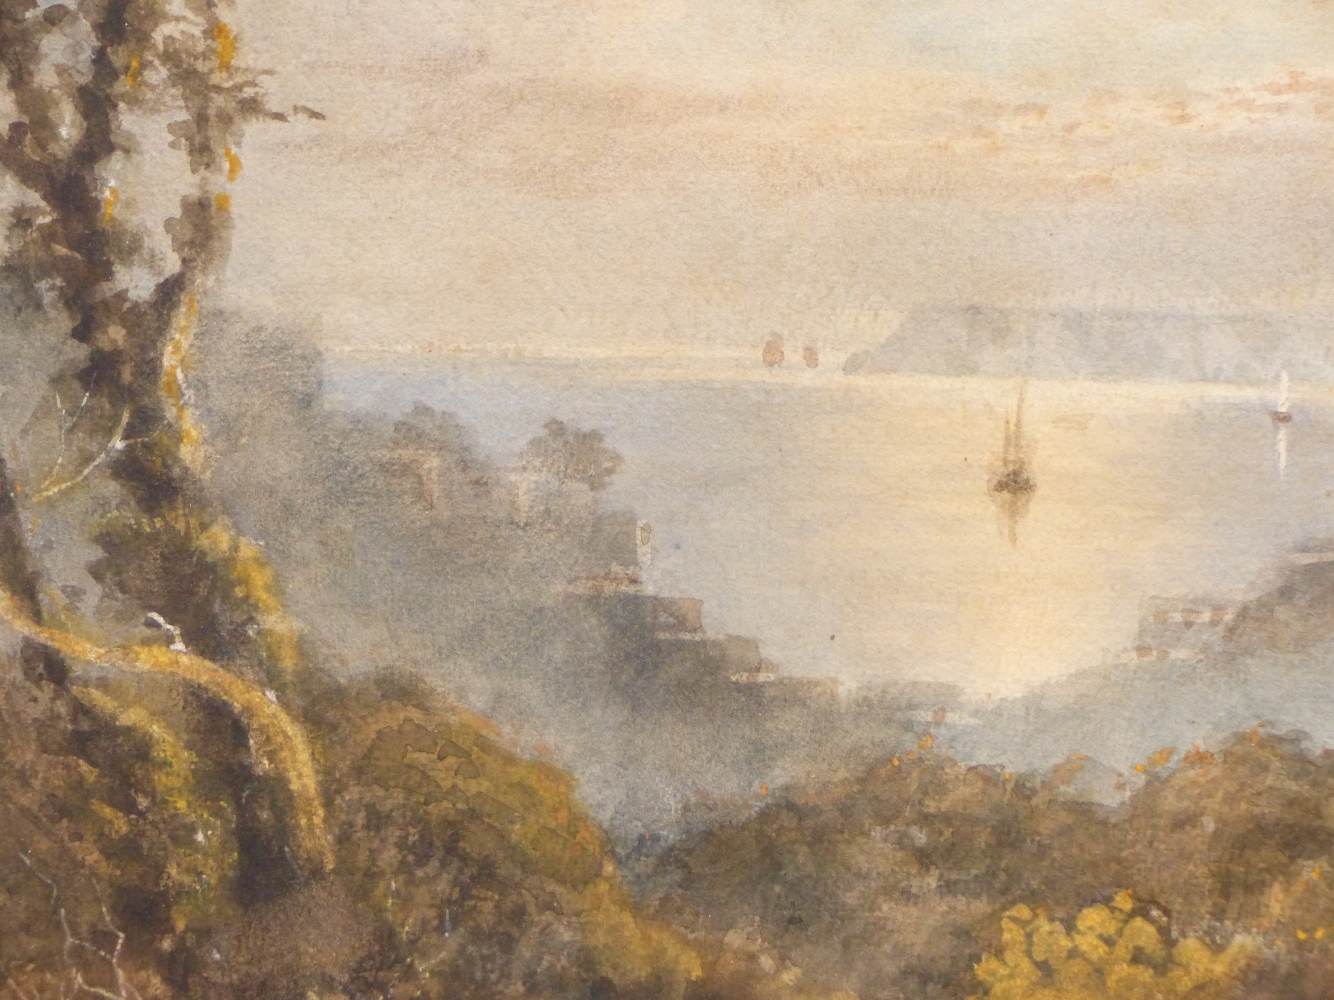 BRITISH SCHOOL (19TH CENTURY), MOONLIT COASTAL SCENE WITH BOAT IN A BAY, WATERCOLOUR, 39 x 29.5cm. - Image 3 of 6